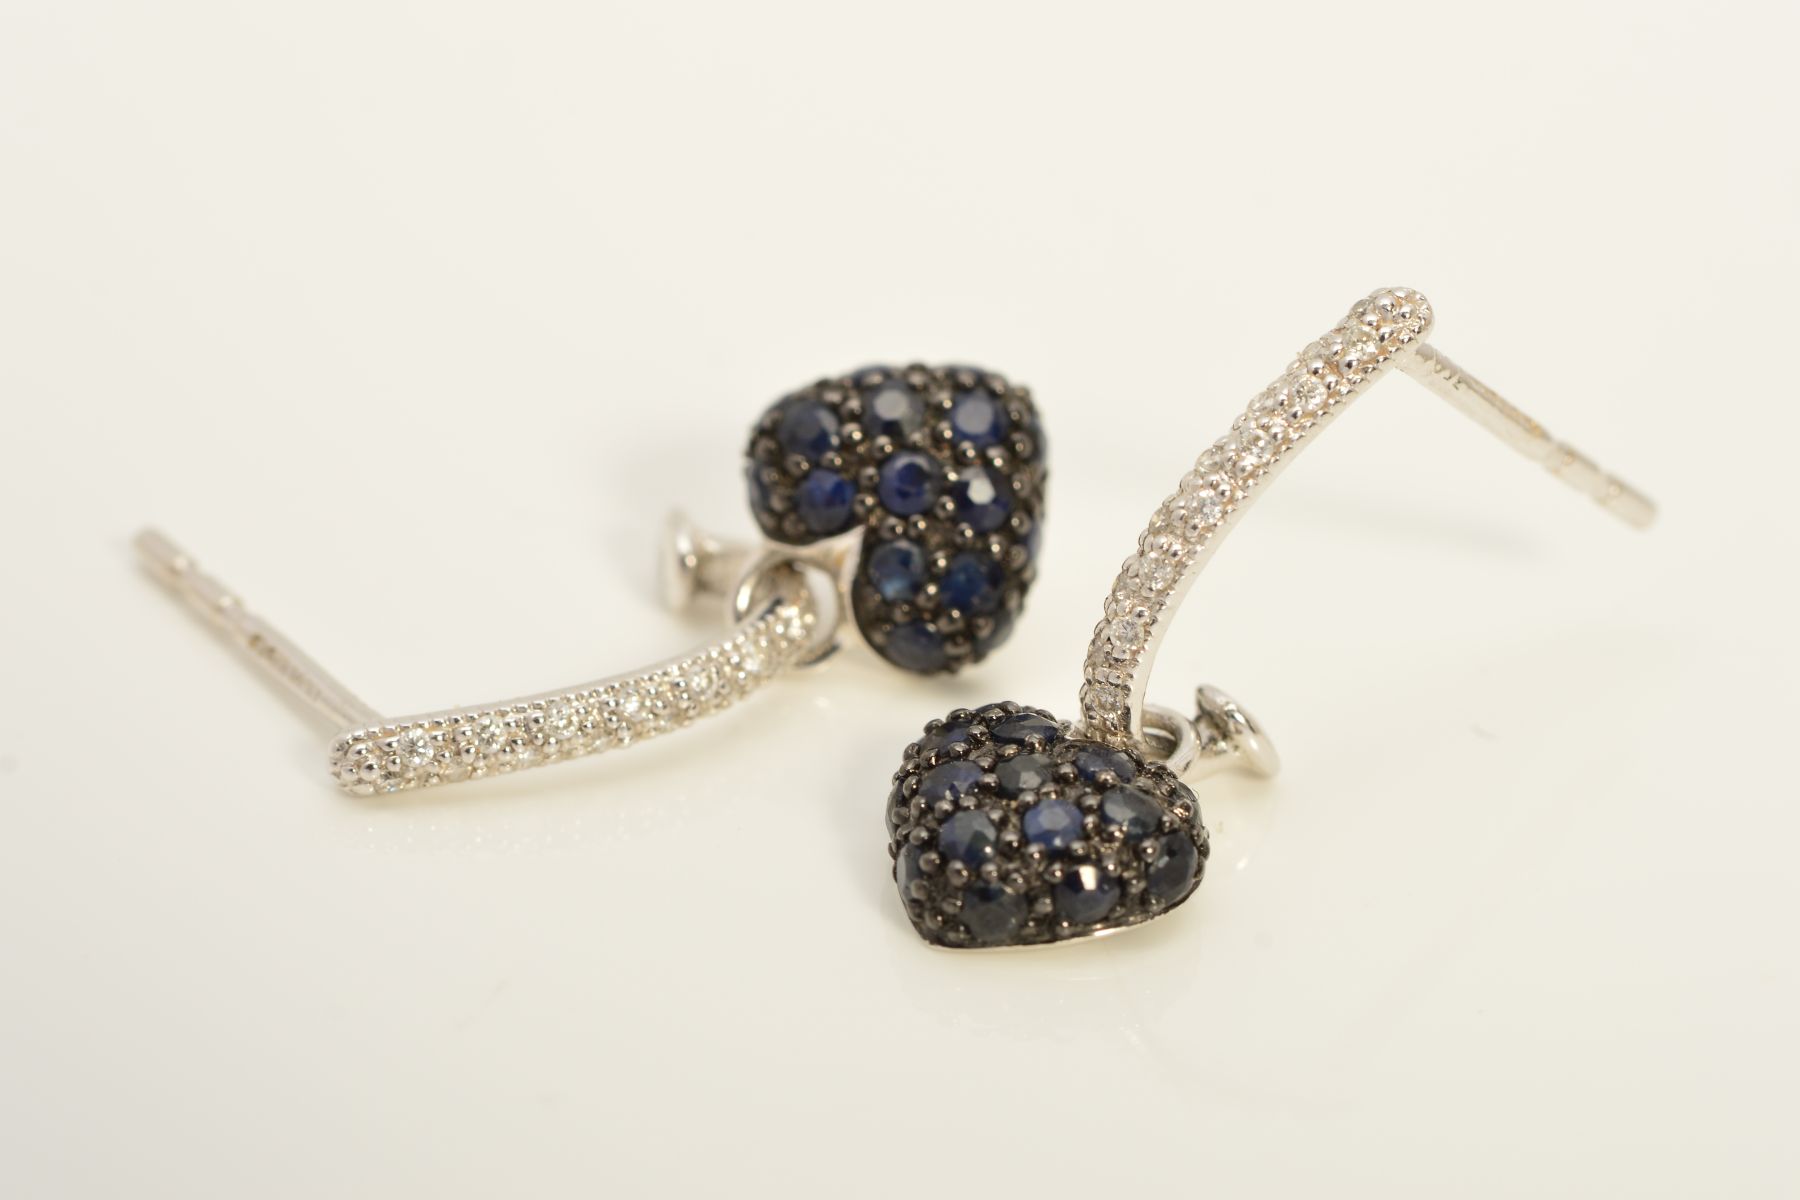 A PAIR OF 18CT WHITE GOLD DIAMOND AND SAPPHIRE DROP EARRINGS, each designed as a heart shape